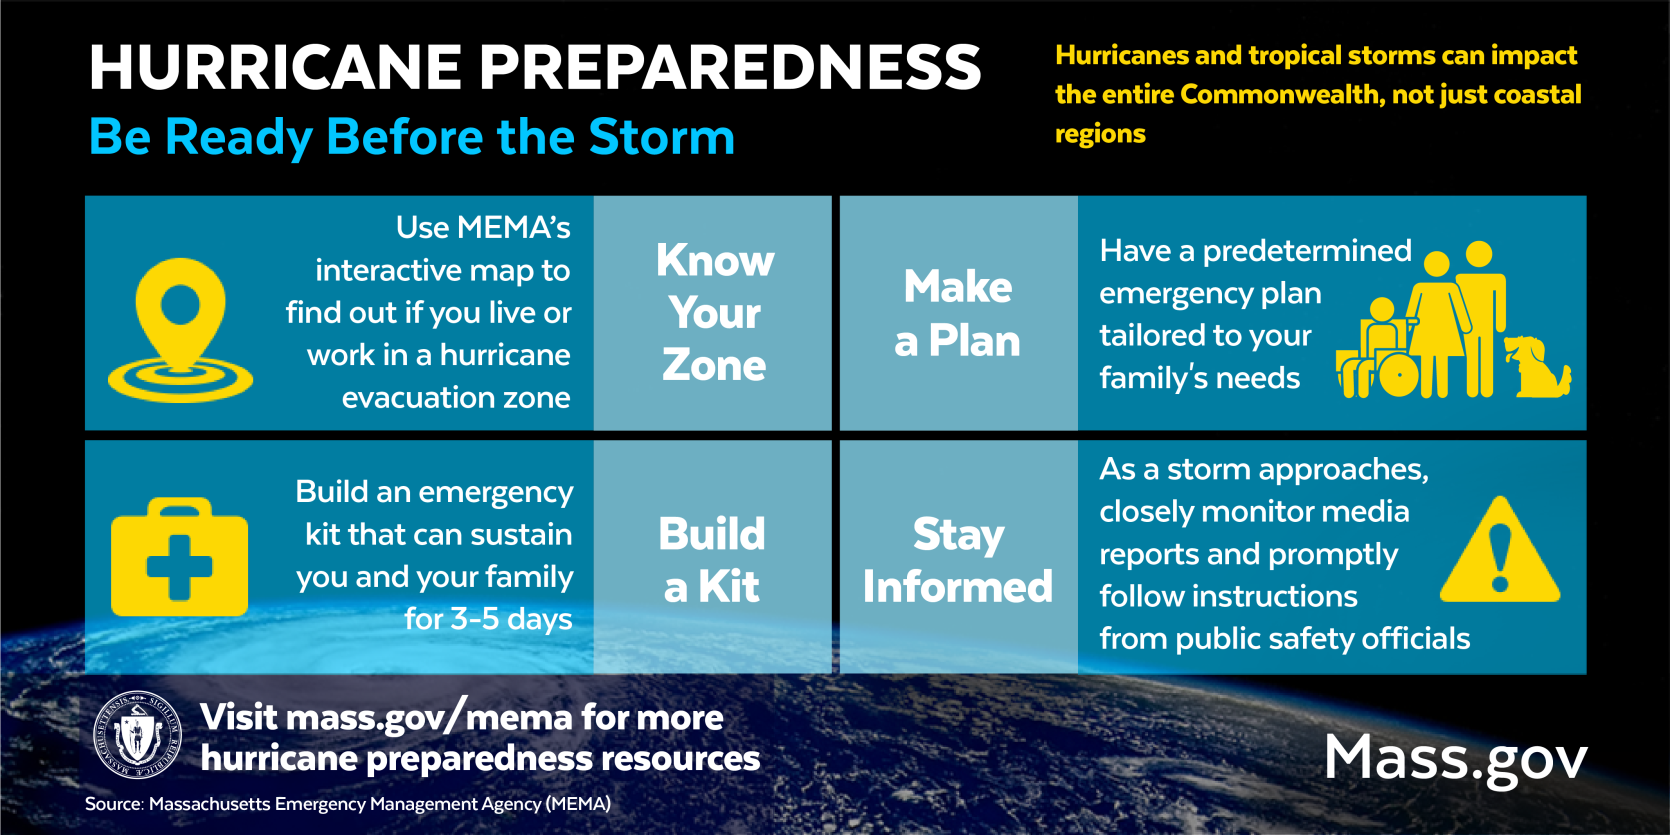 Hurricane Preparedness - be ready before the storm. Know Your Zone, Build a Kit, Make a Plan, Stay Informed